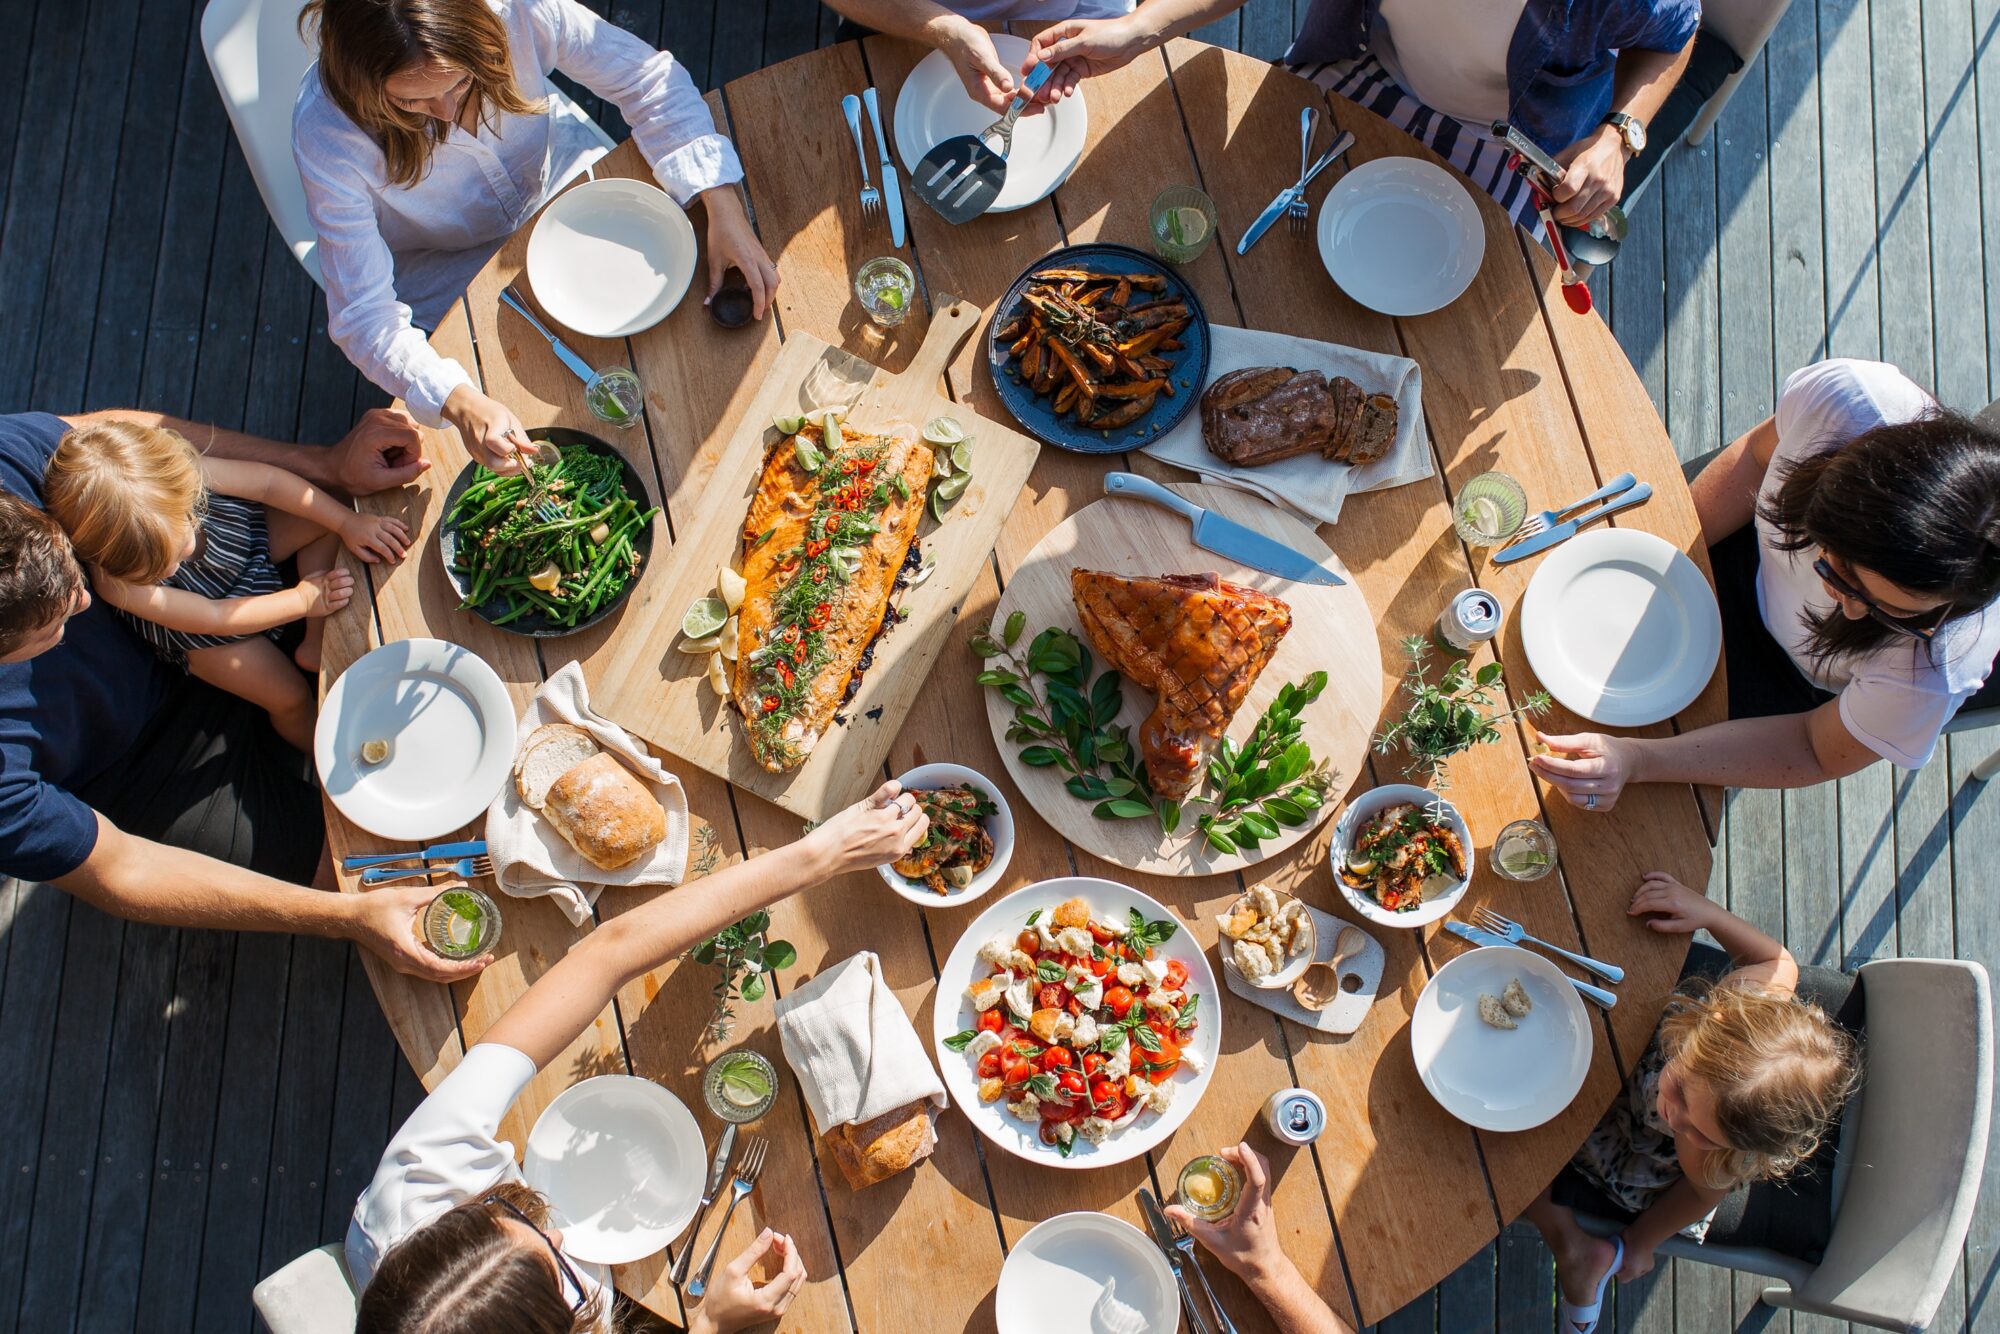 A view from above of nine people sharing a meal at a circular table. They are eating a colorful, fresh meal together with a caprese salad, a sie of glazed ham, fish, green beans, and more.